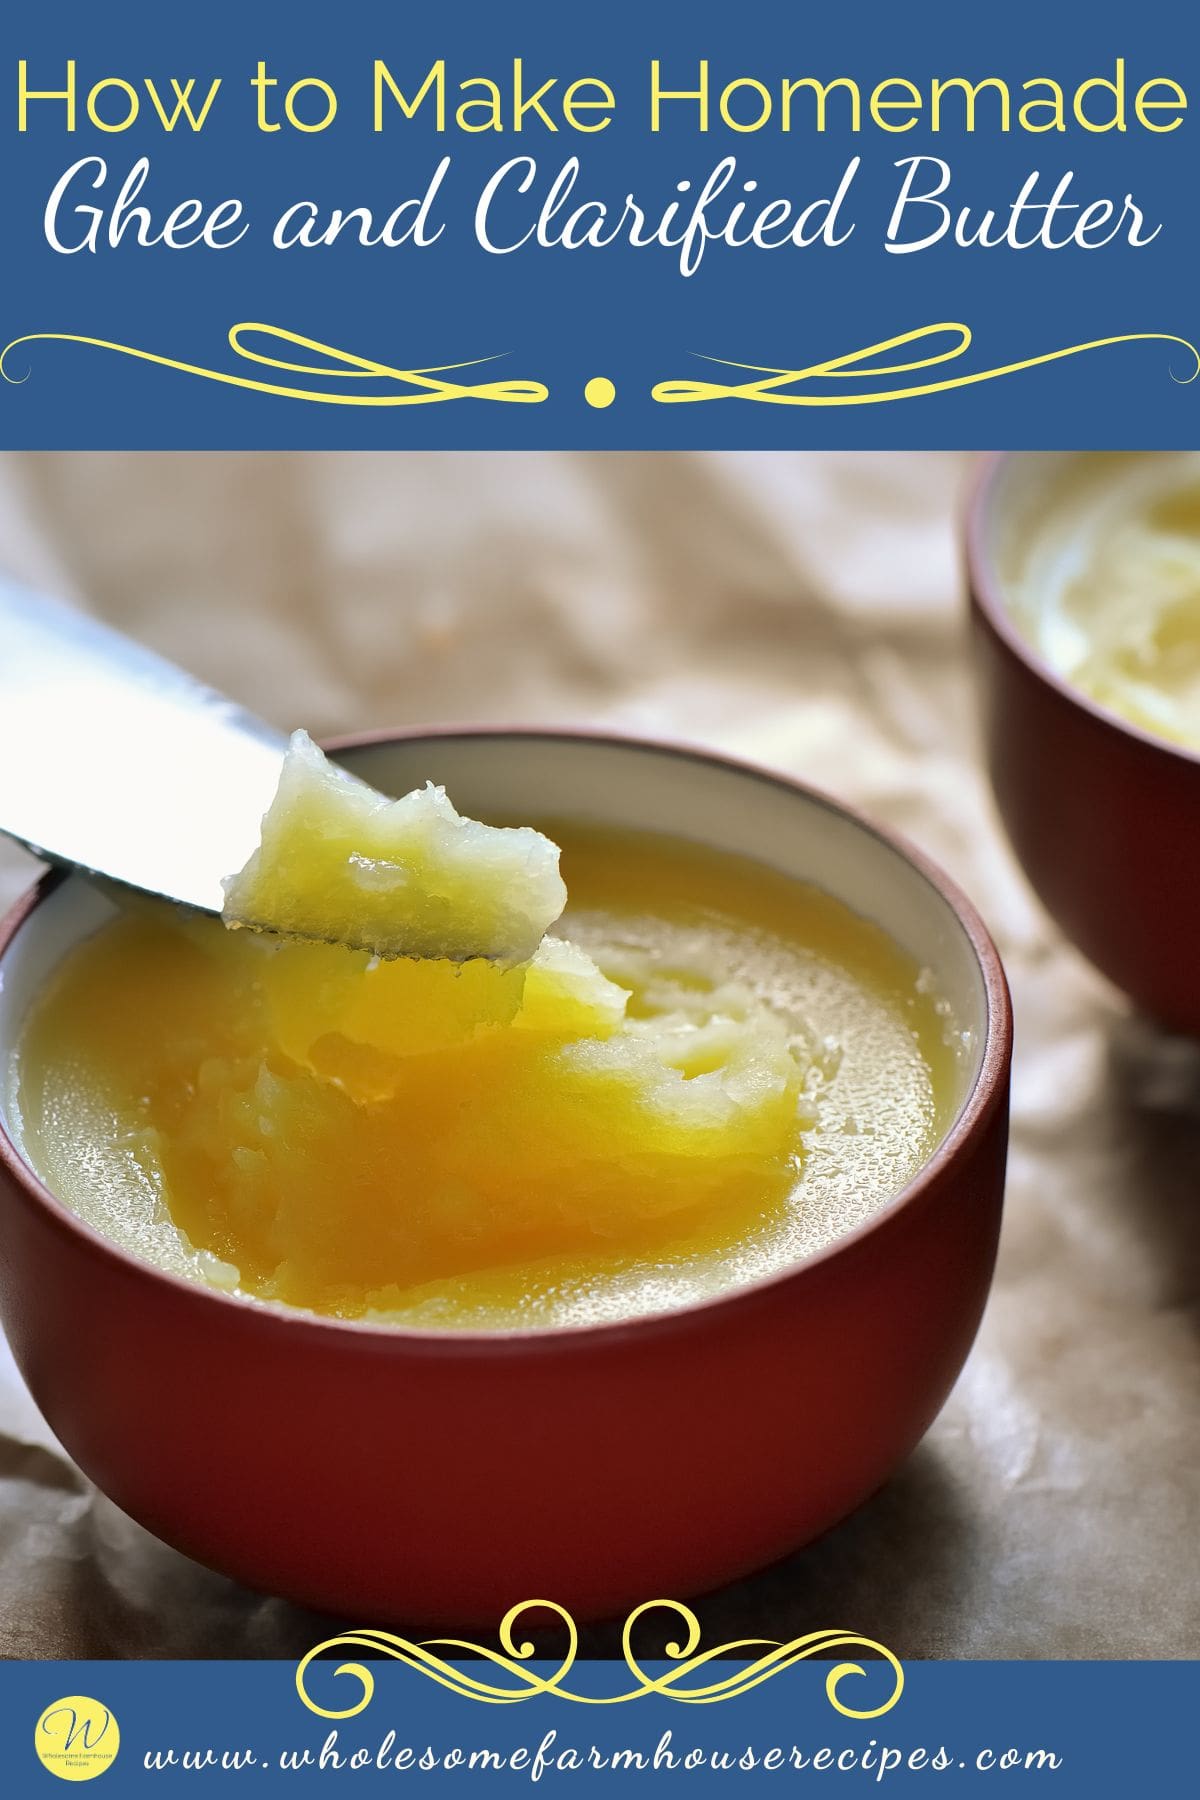 How to Make Homemade Ghee and Clarified Butter